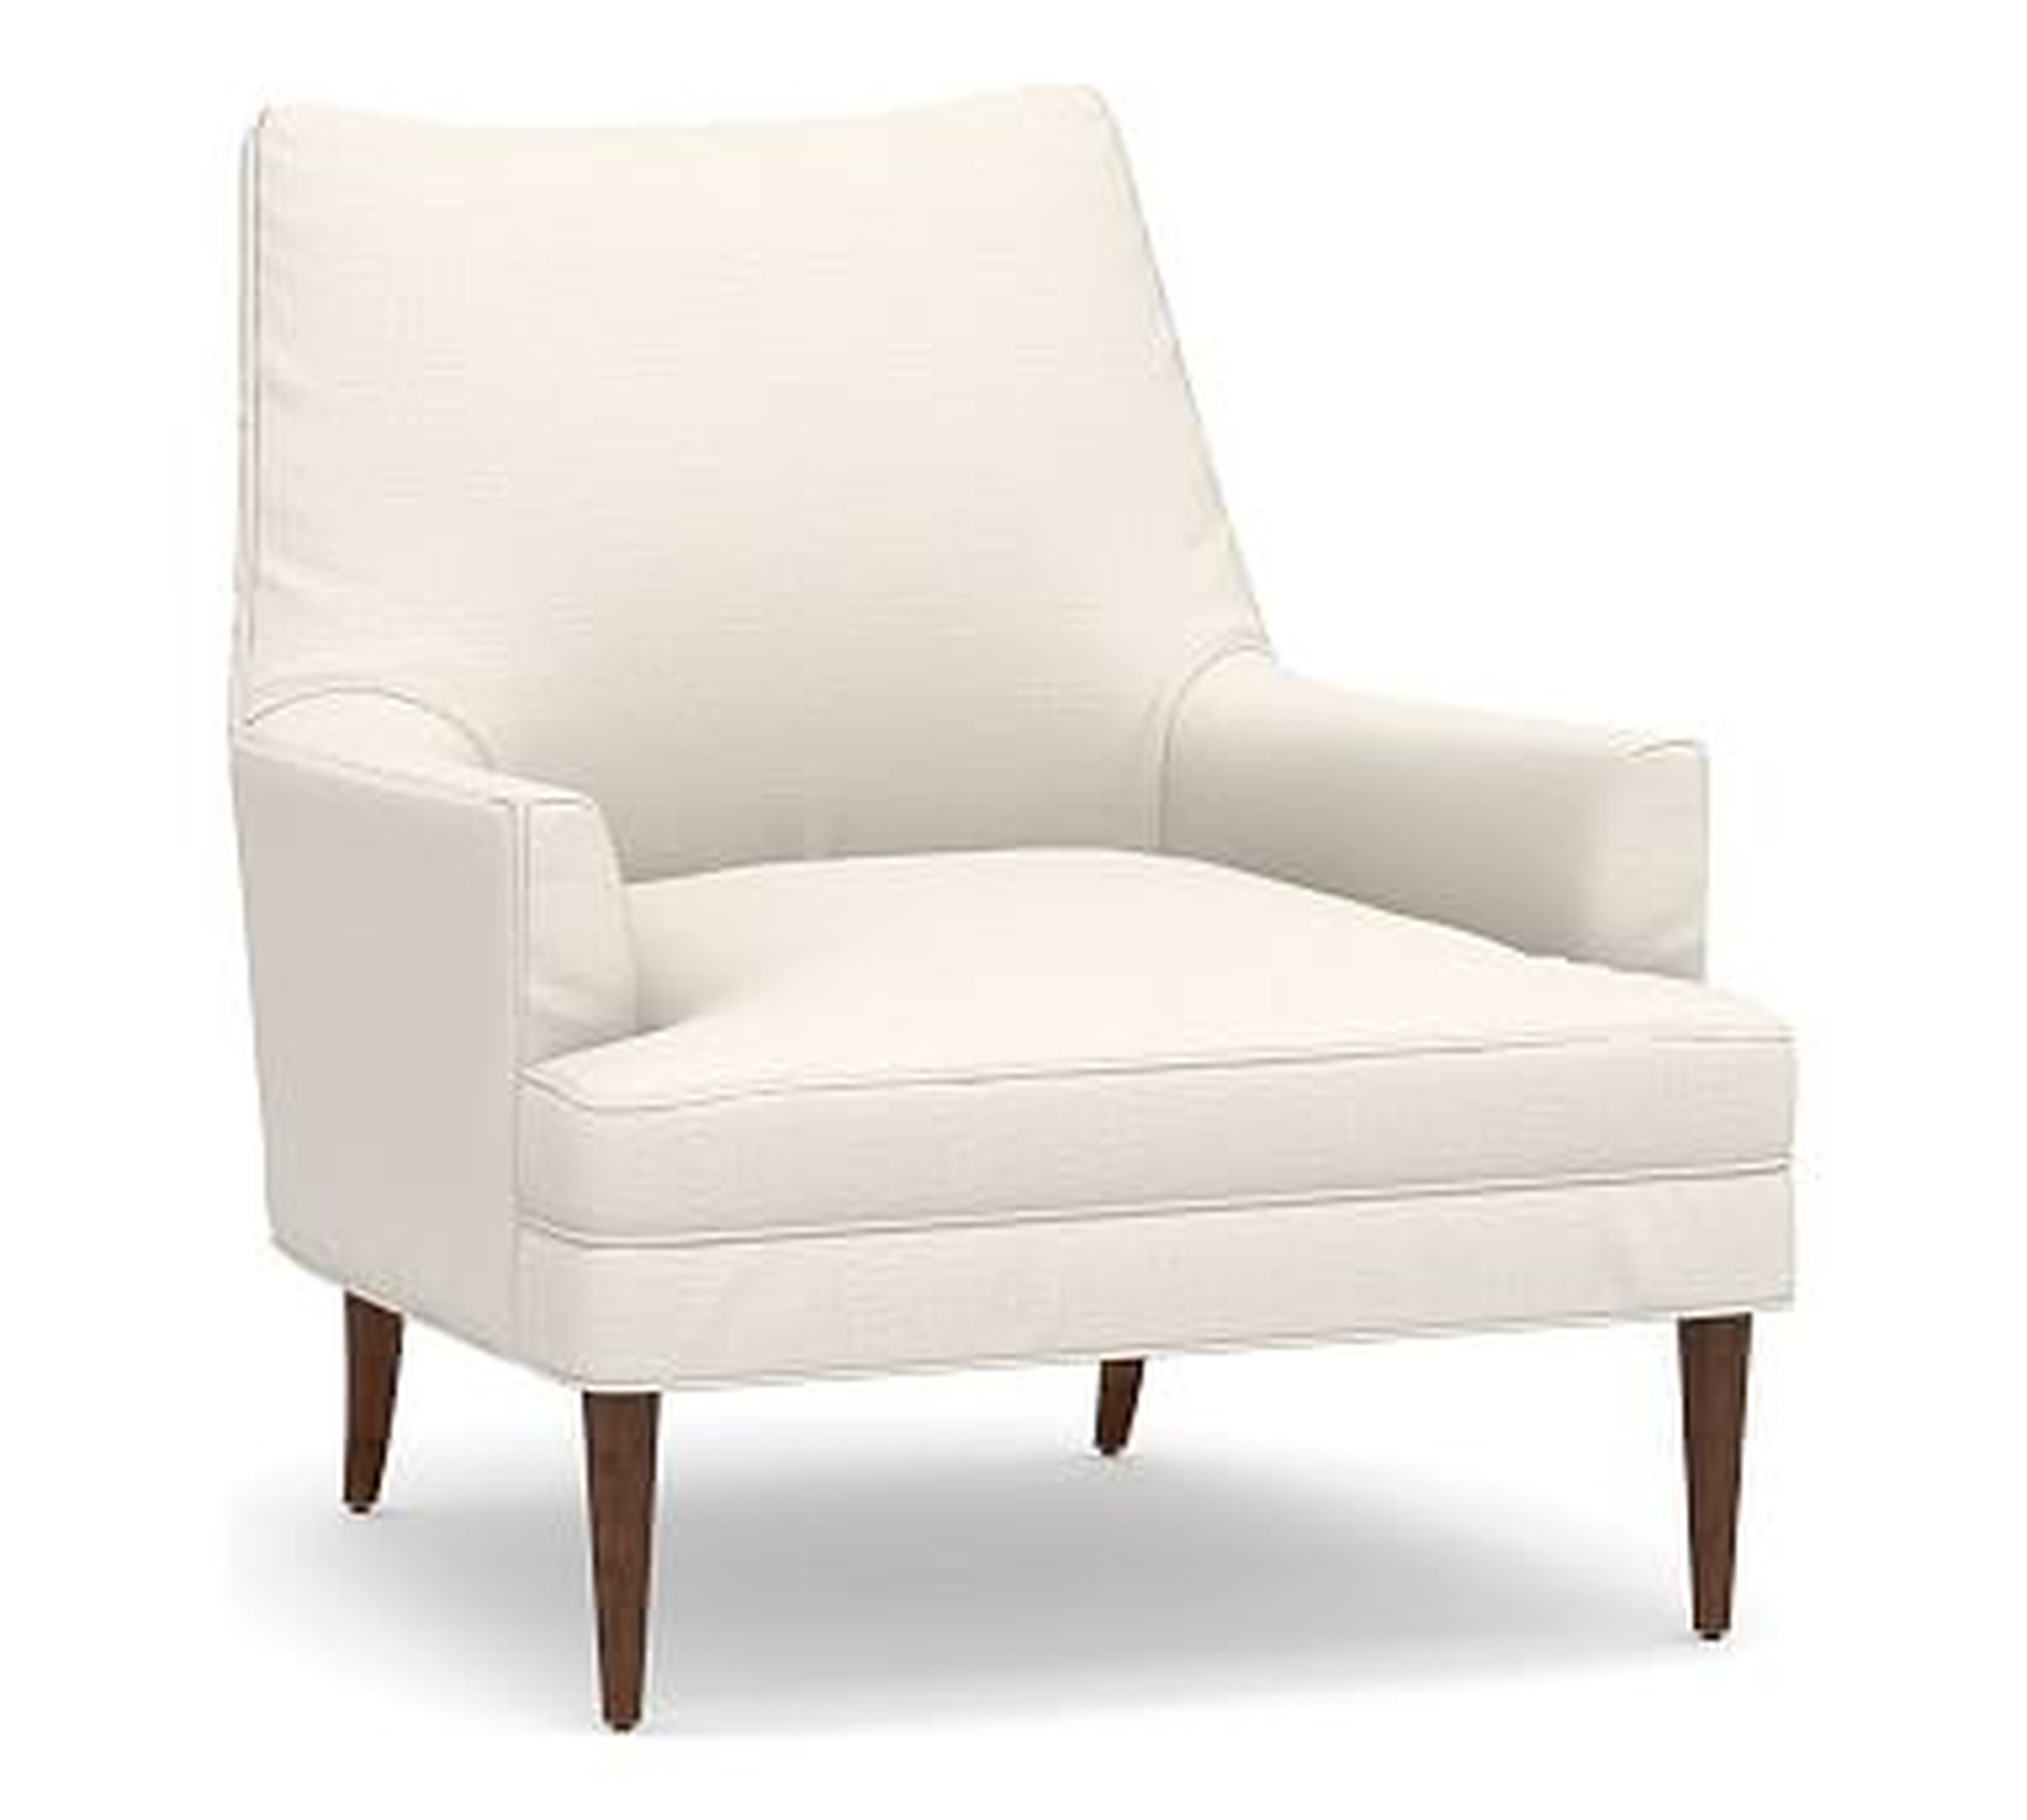 Reyes Upholstered Armchair, Polyester Wrapped Cushions, Performance Chateau Basketweave Ivory - Pottery Barn